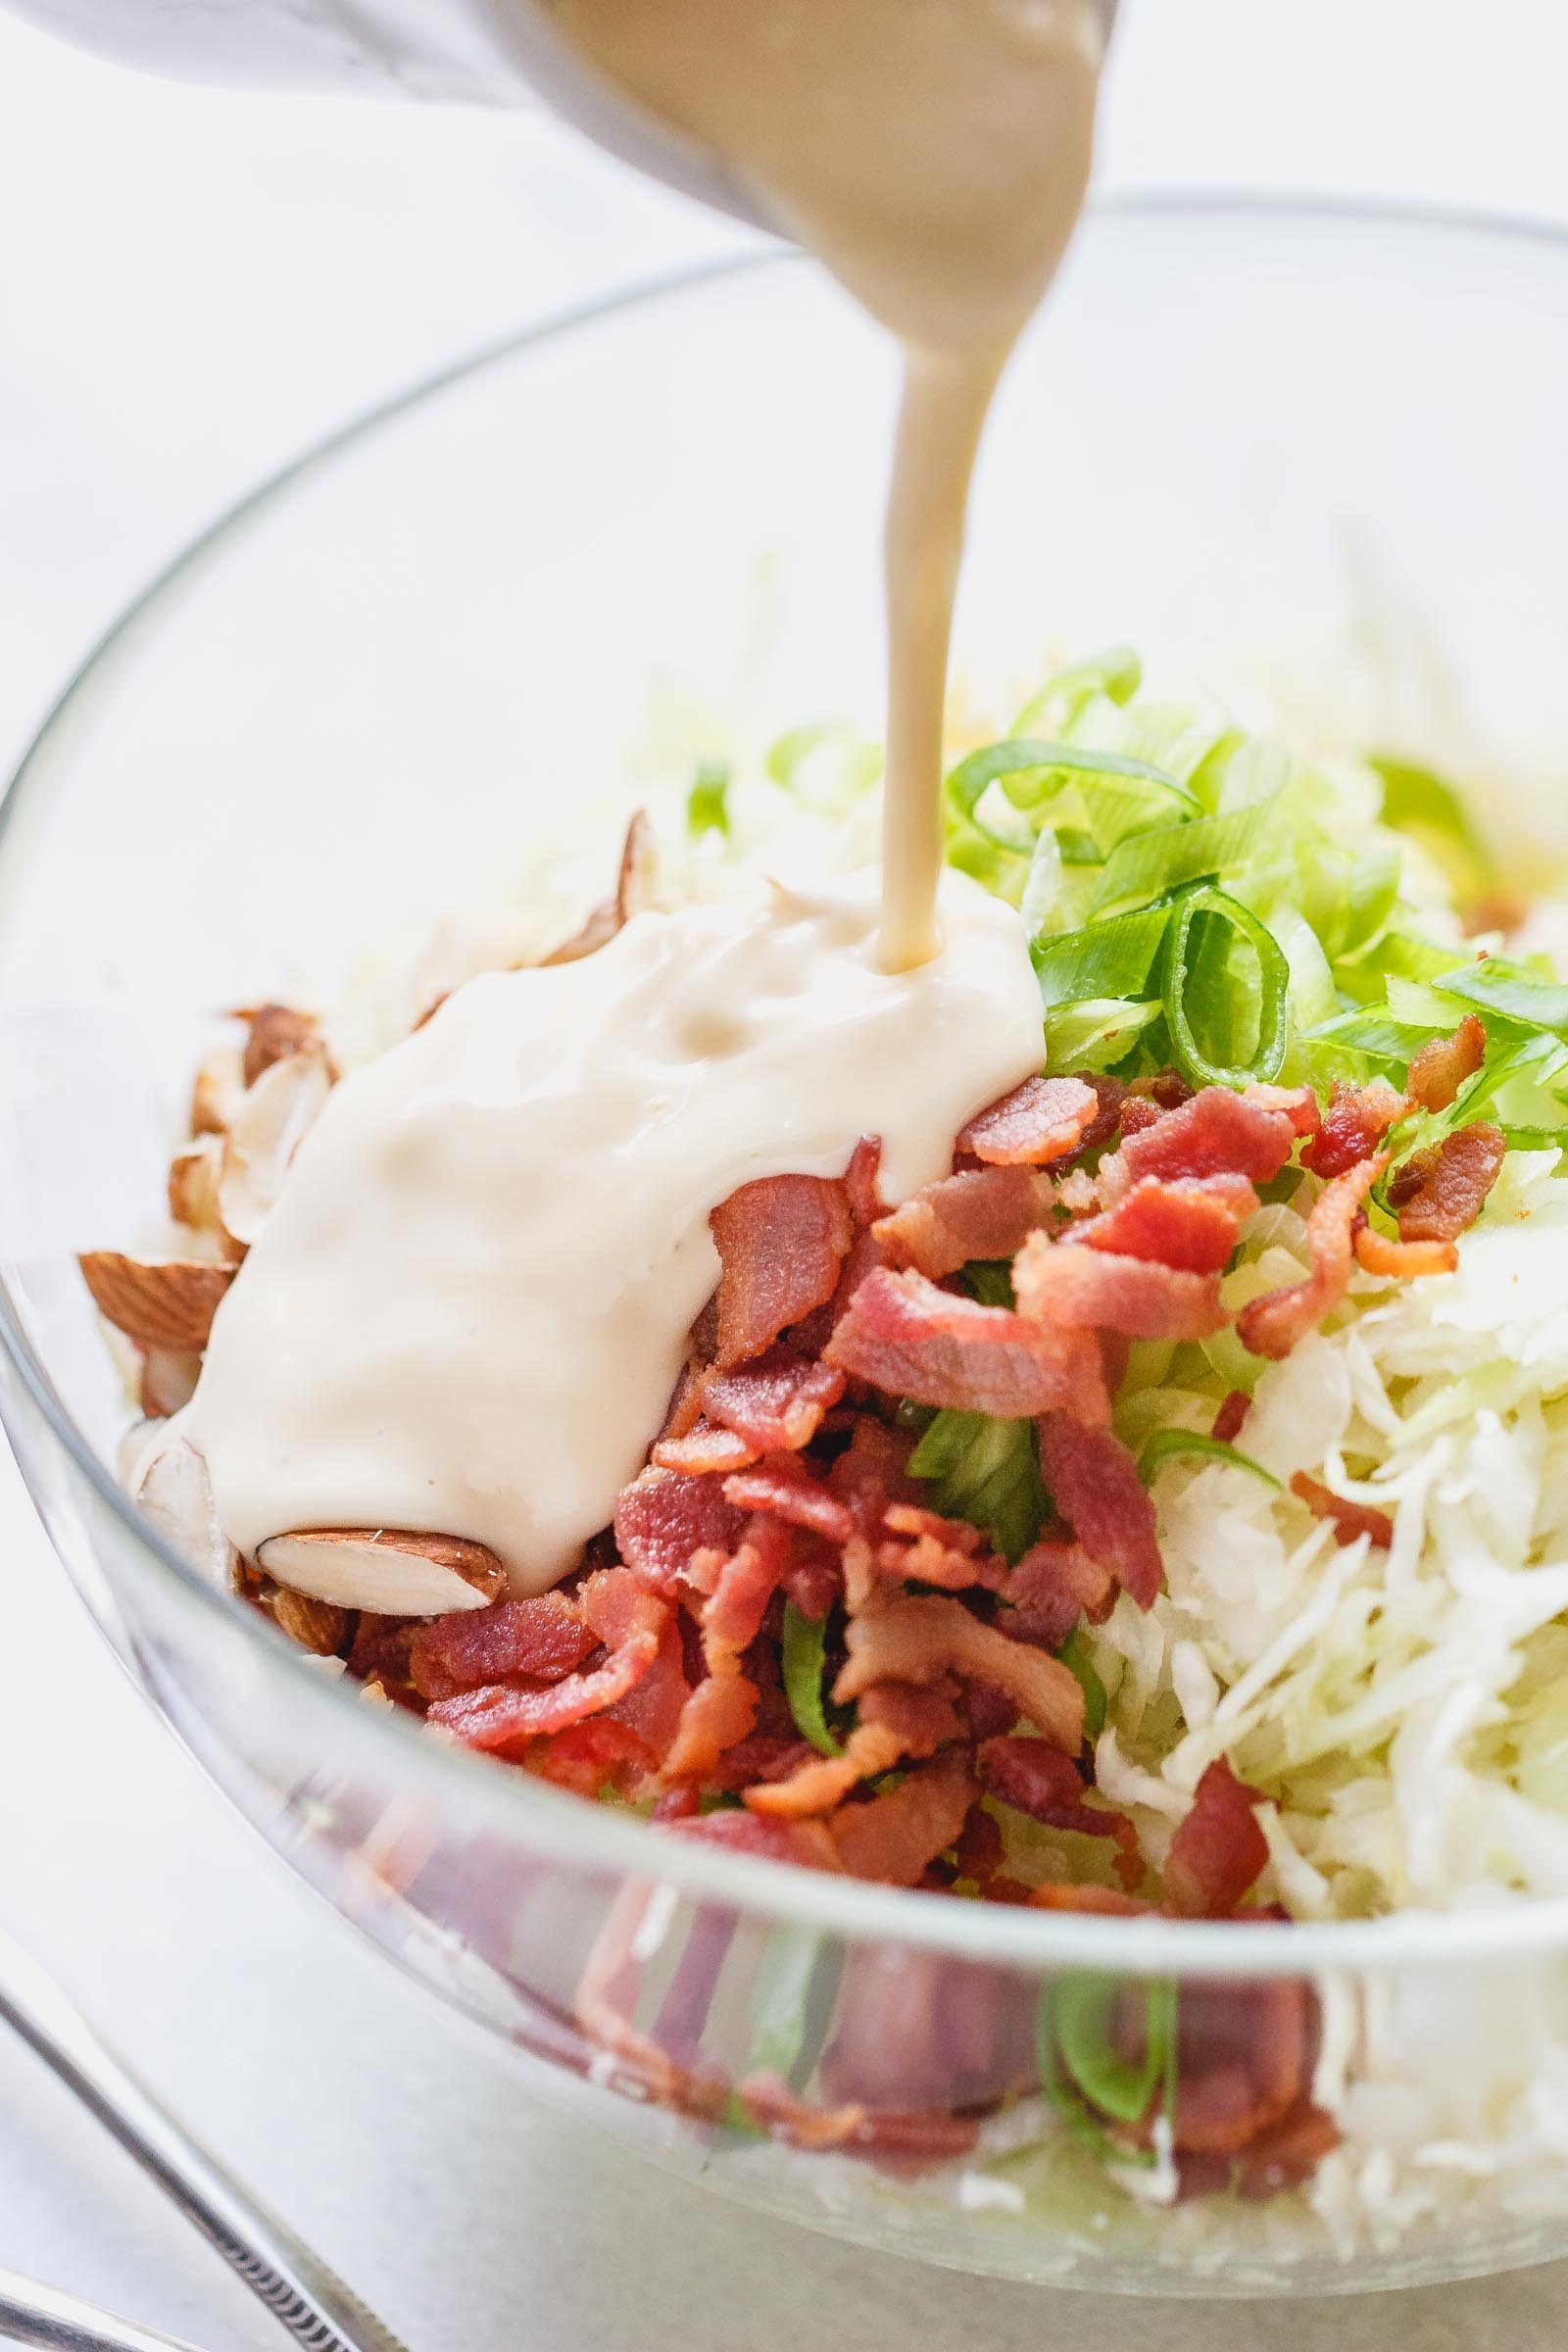 Apple Bacon Coleslaw - Super creamy, crunchy, and fresh! This coleslaw recipe only takes a few minutes to make and is packed with bright and delicious flavor!